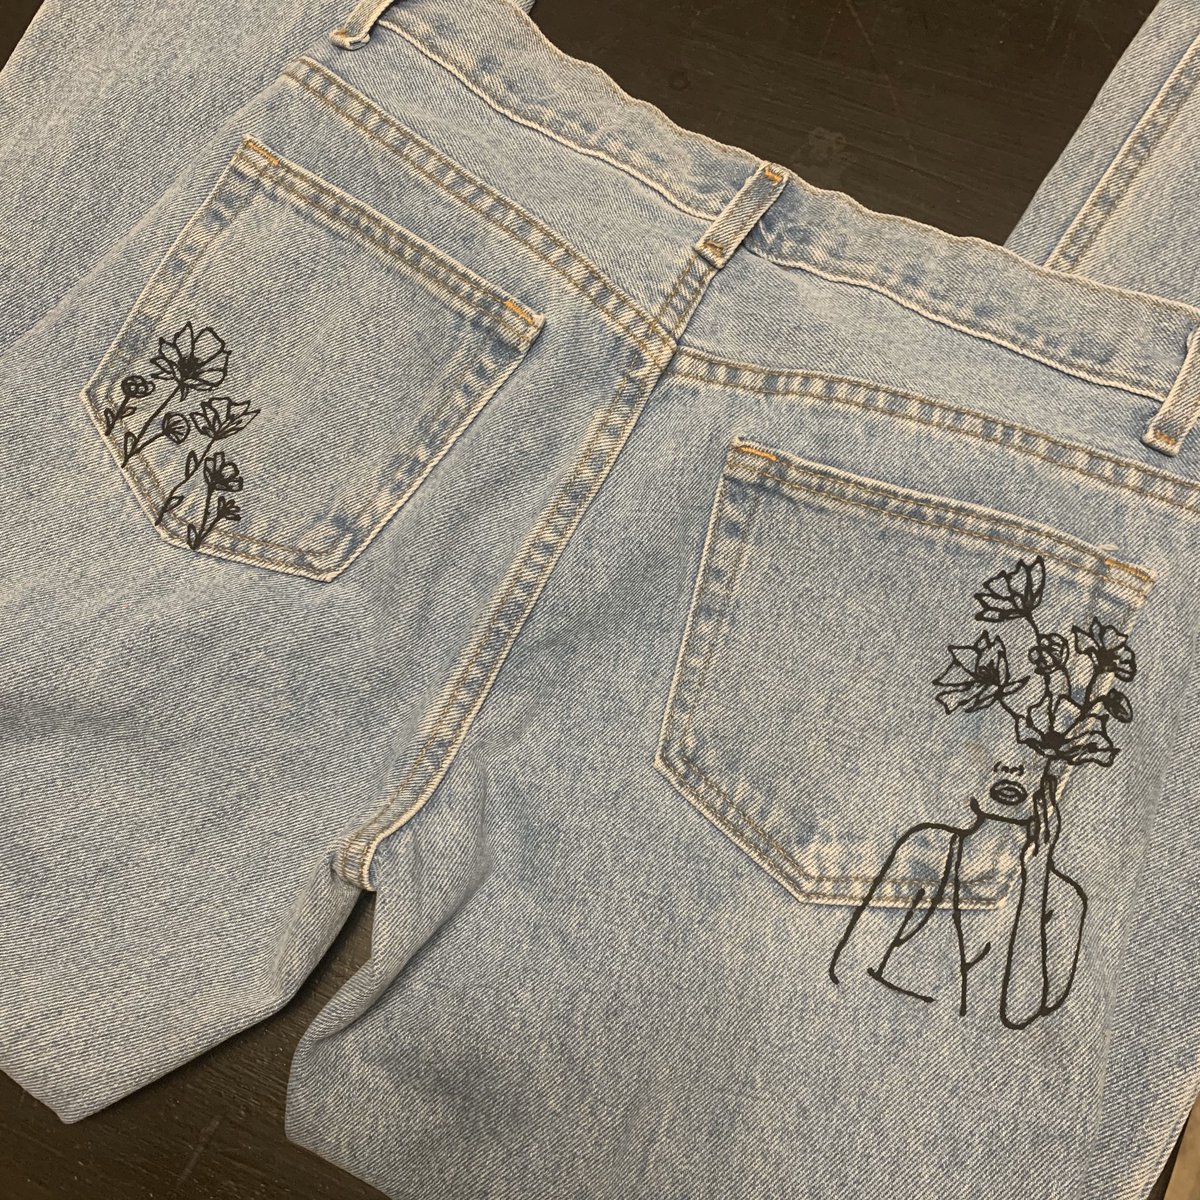 Starting a thread of the jeans I paint! Here are the first 2 